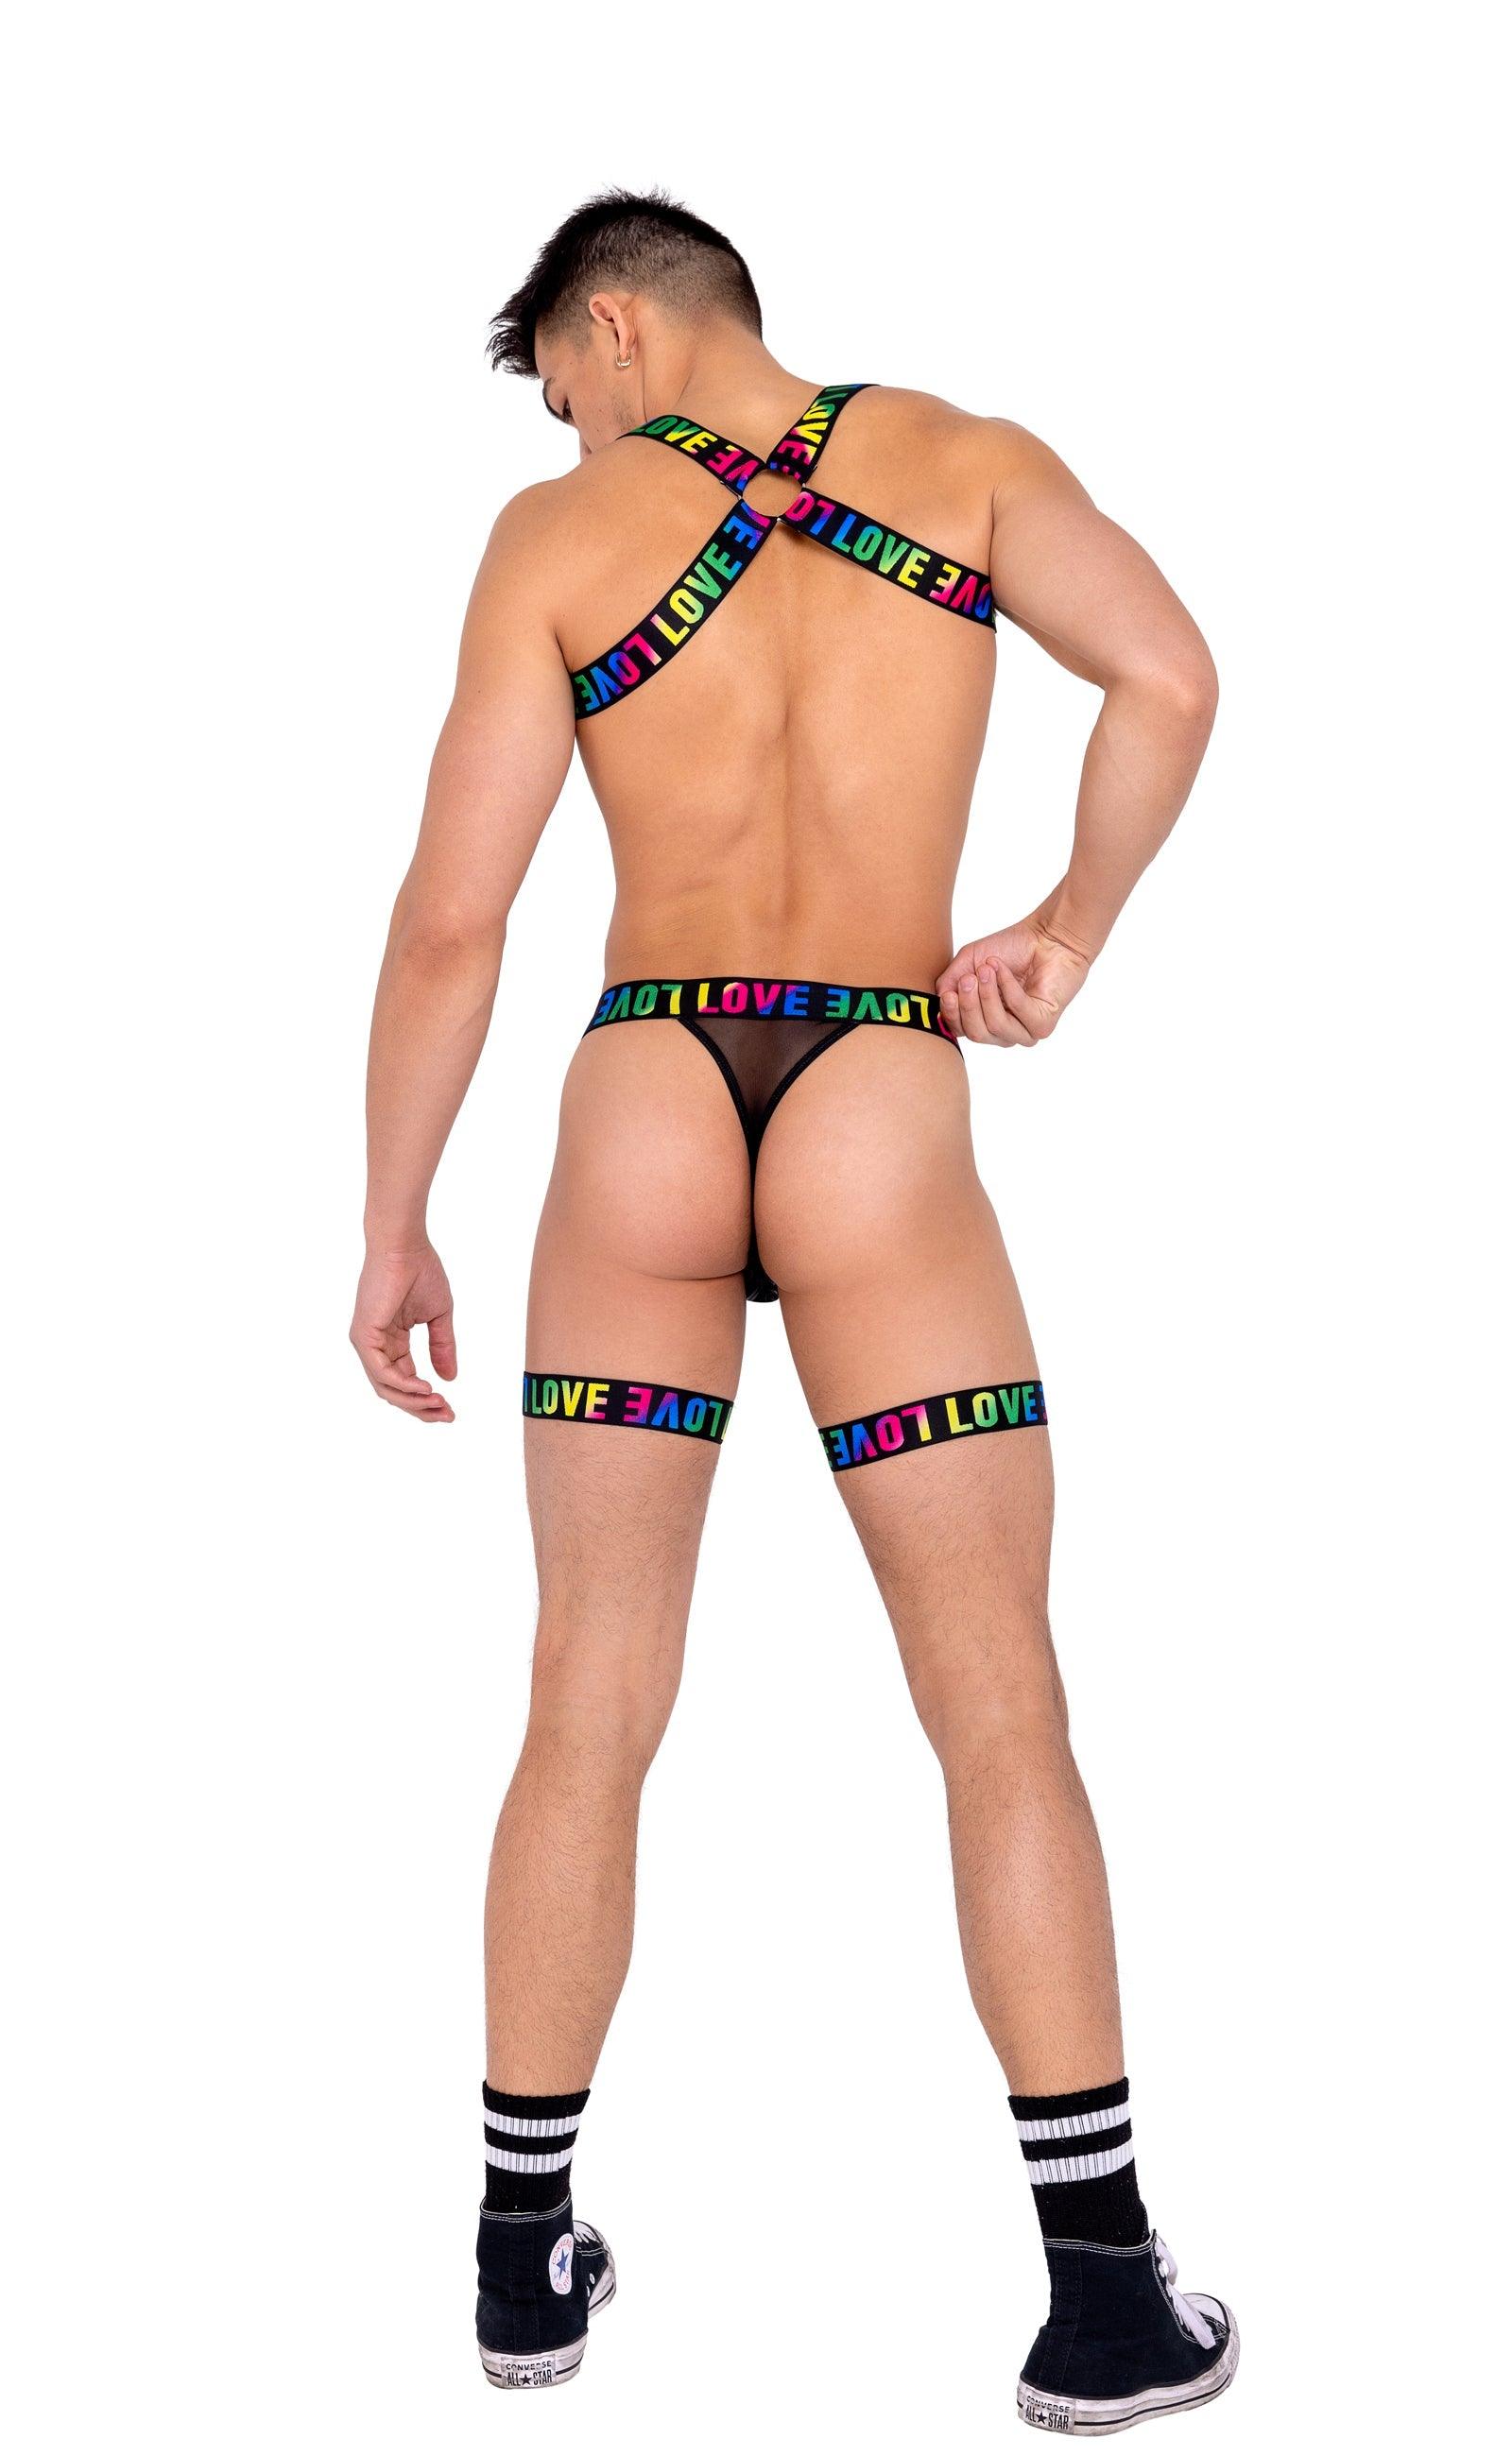 6158 - Mens Pride Thong with Attached Garters - Take A Peek